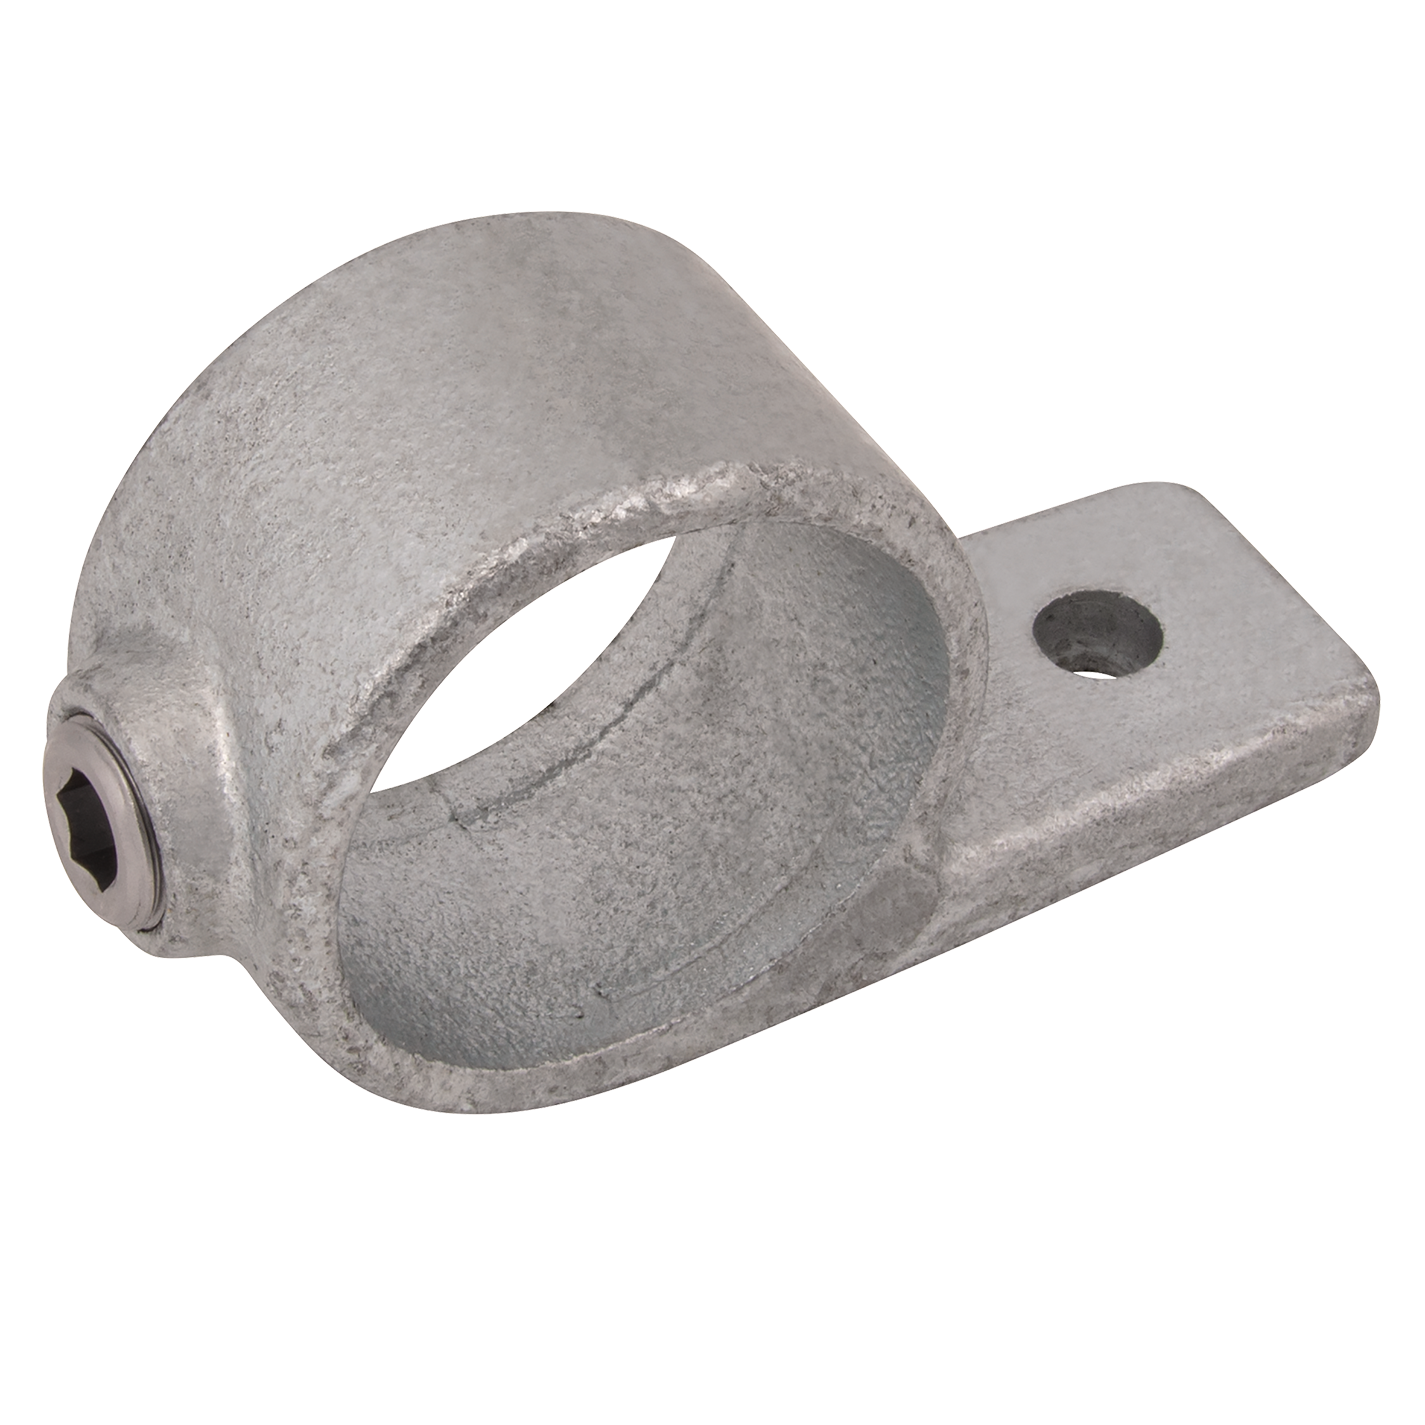 SINGLE PIPE CLAMP (199) SIZE 4